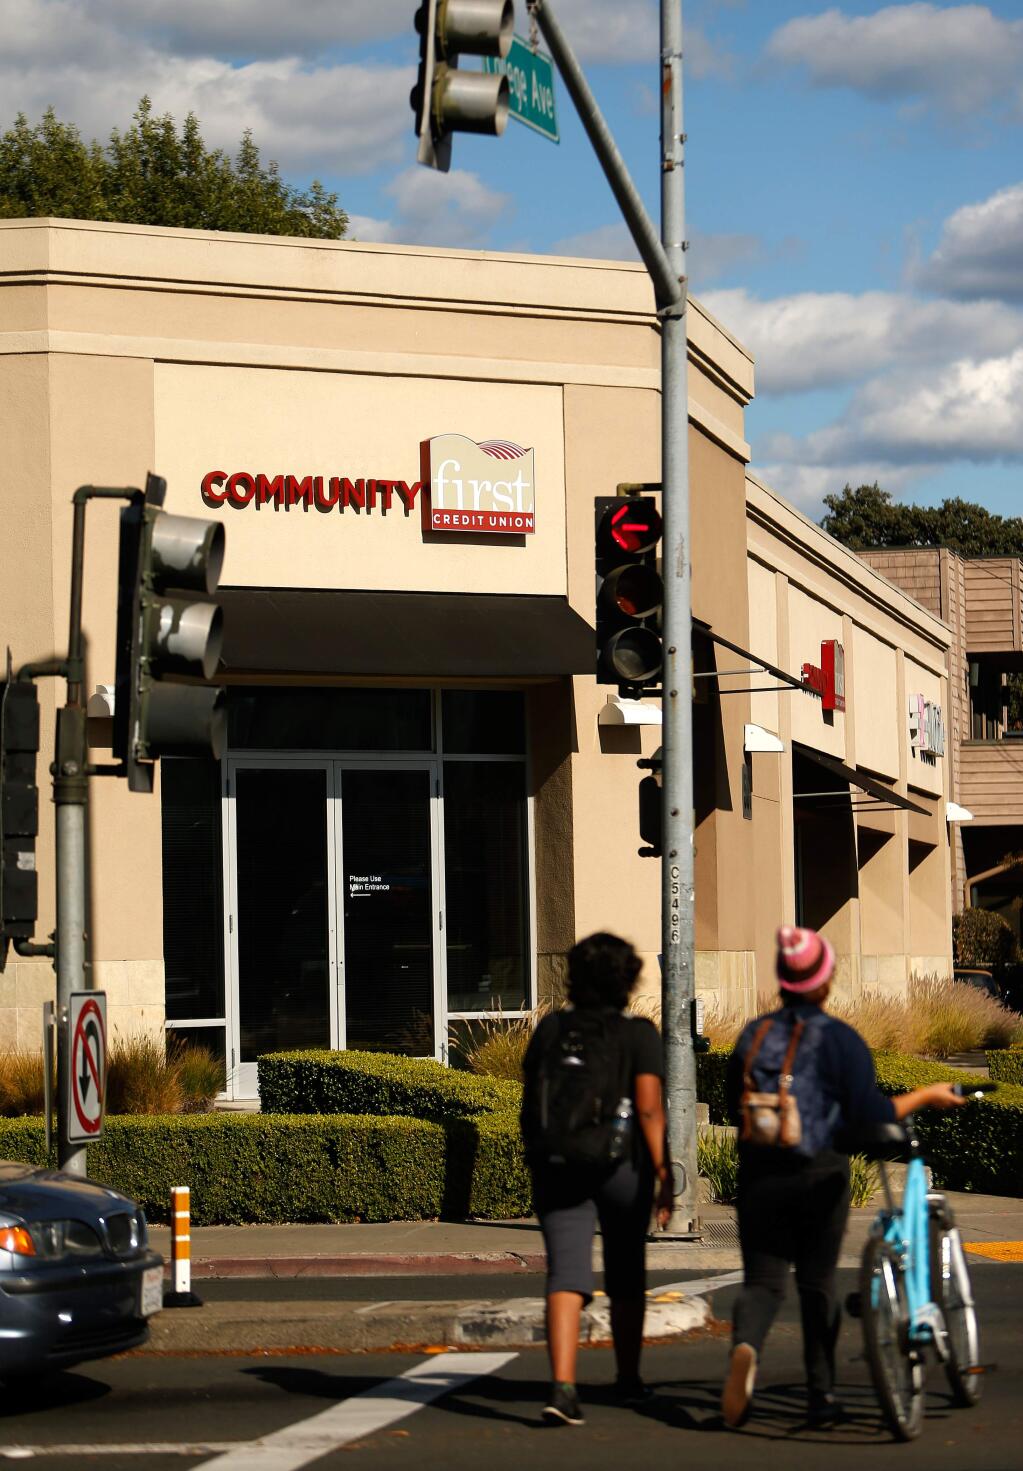 Pedestrians cross the street in front of the the Community First Credit Union branch at the corner of College and Mendocino Avenues, in Santa Rosa, California on Tuesday, October 4, 2016. (Alvin Jornada / The Press Democrat)